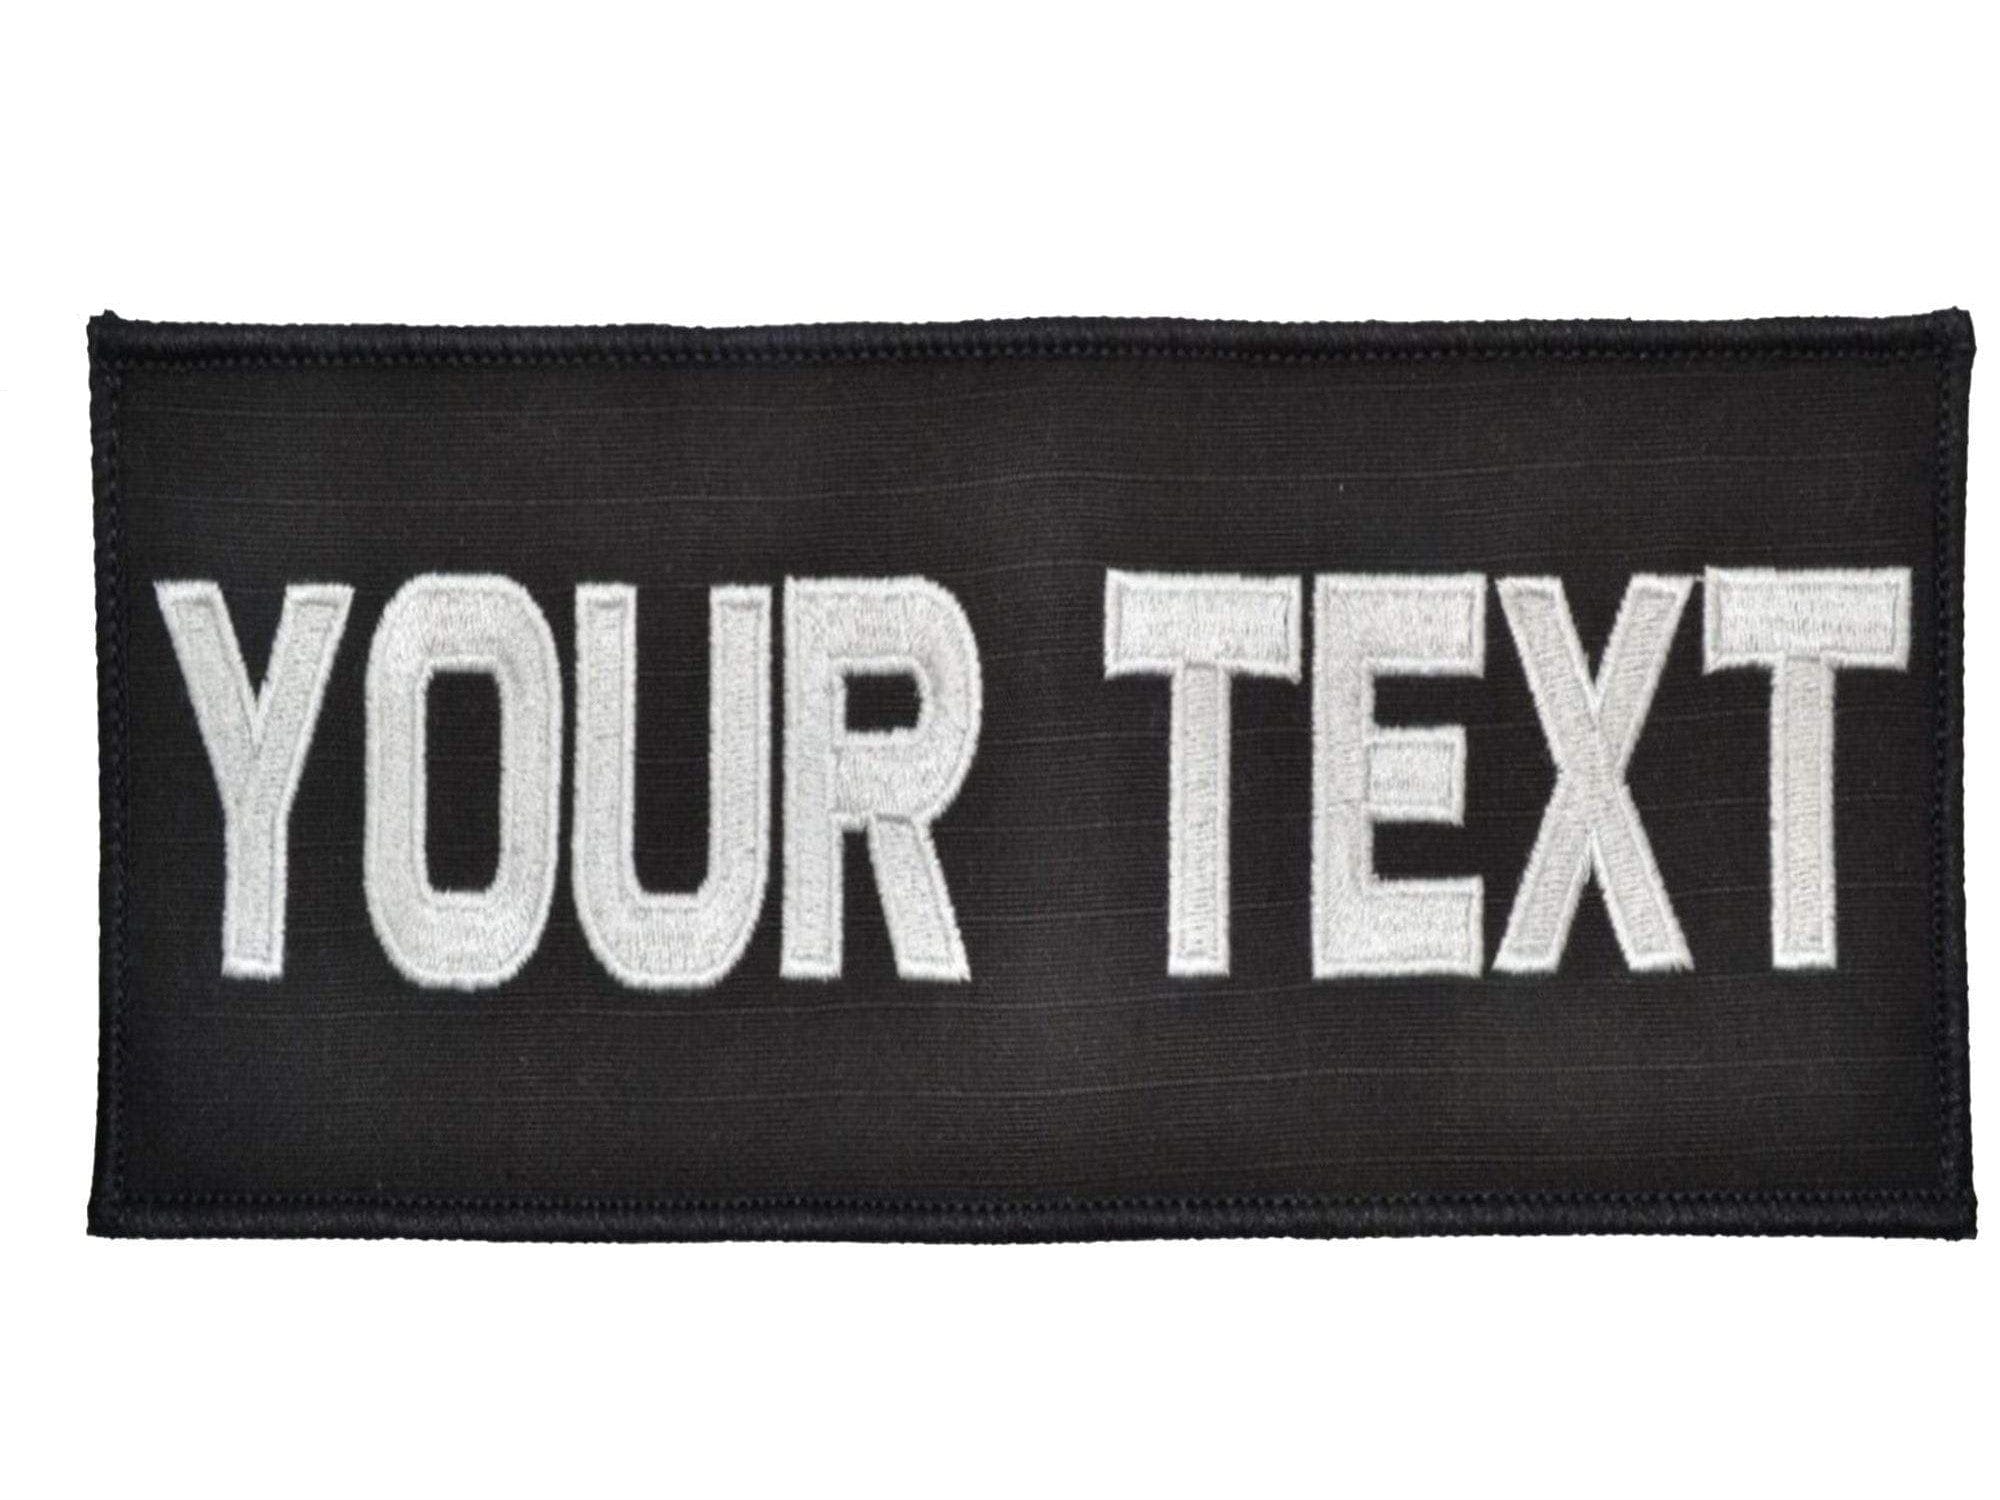 Custom Plate Carrier Text Patch - 3x5